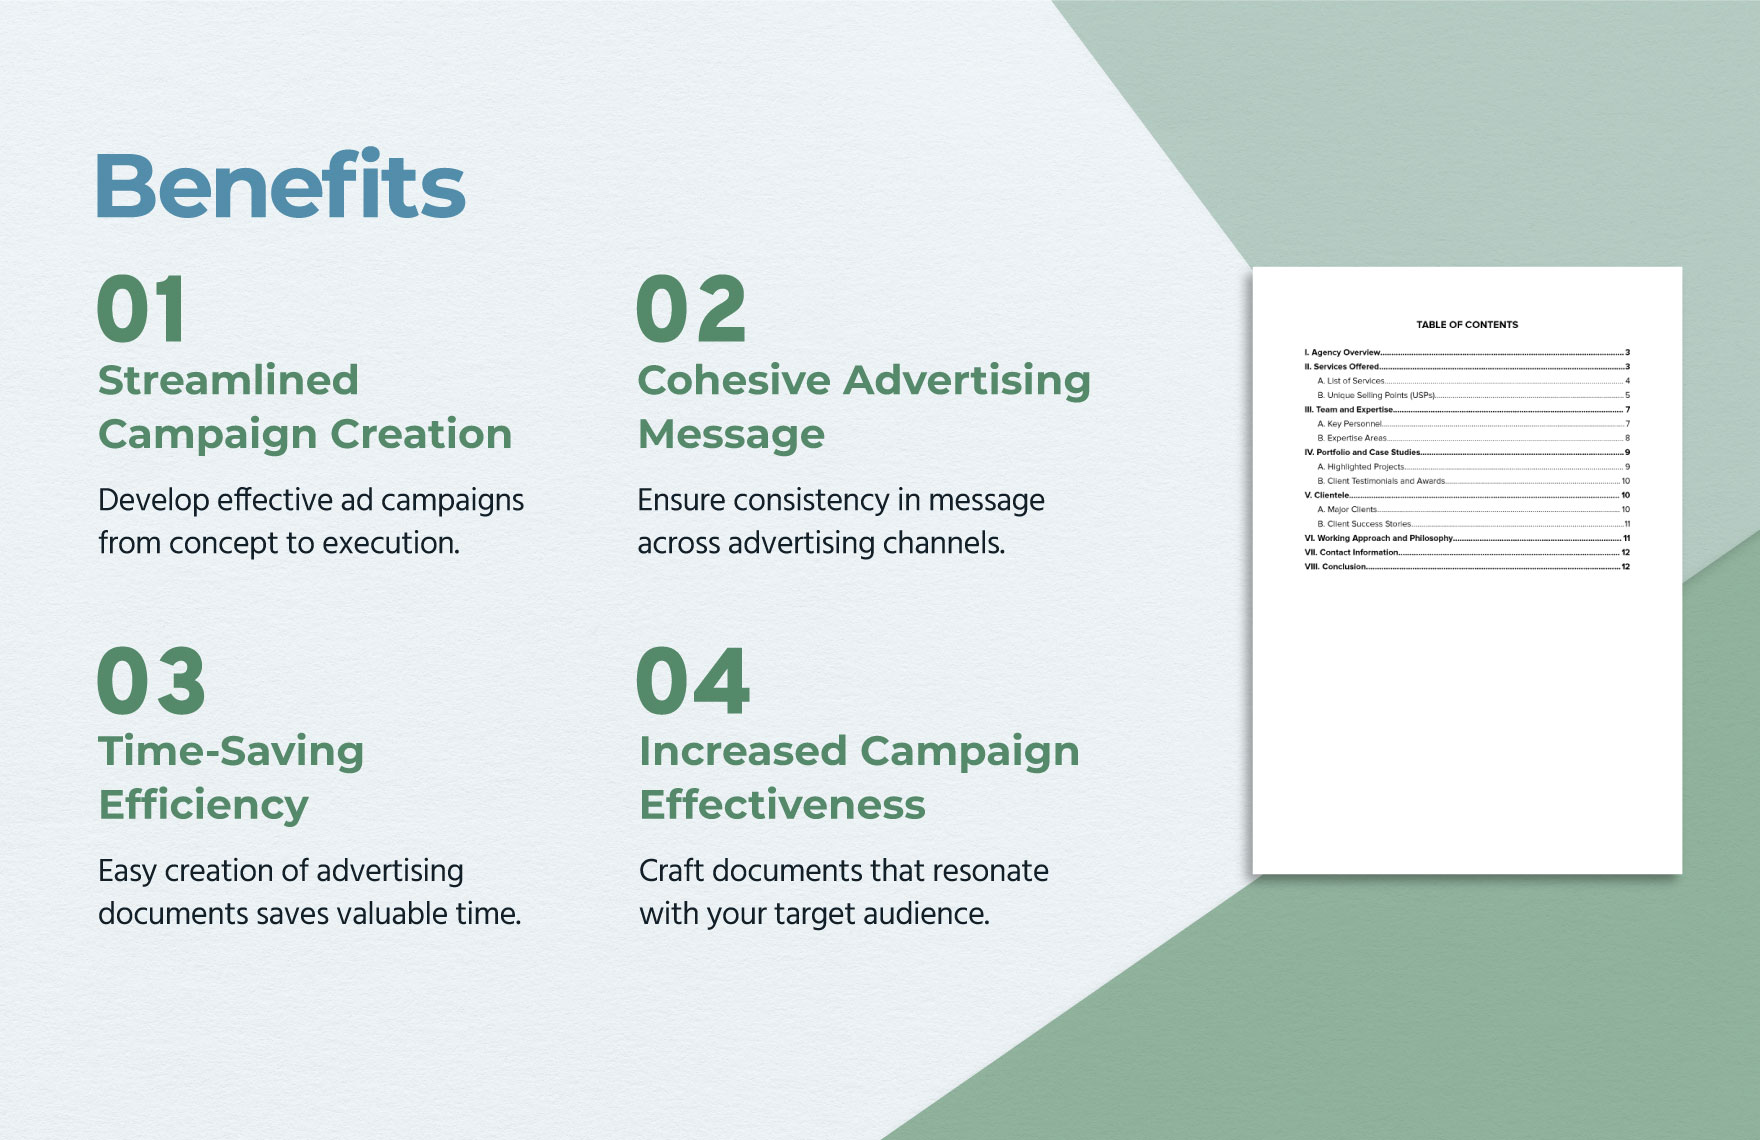 Advertising Agency Introduction Advertising Handout Template